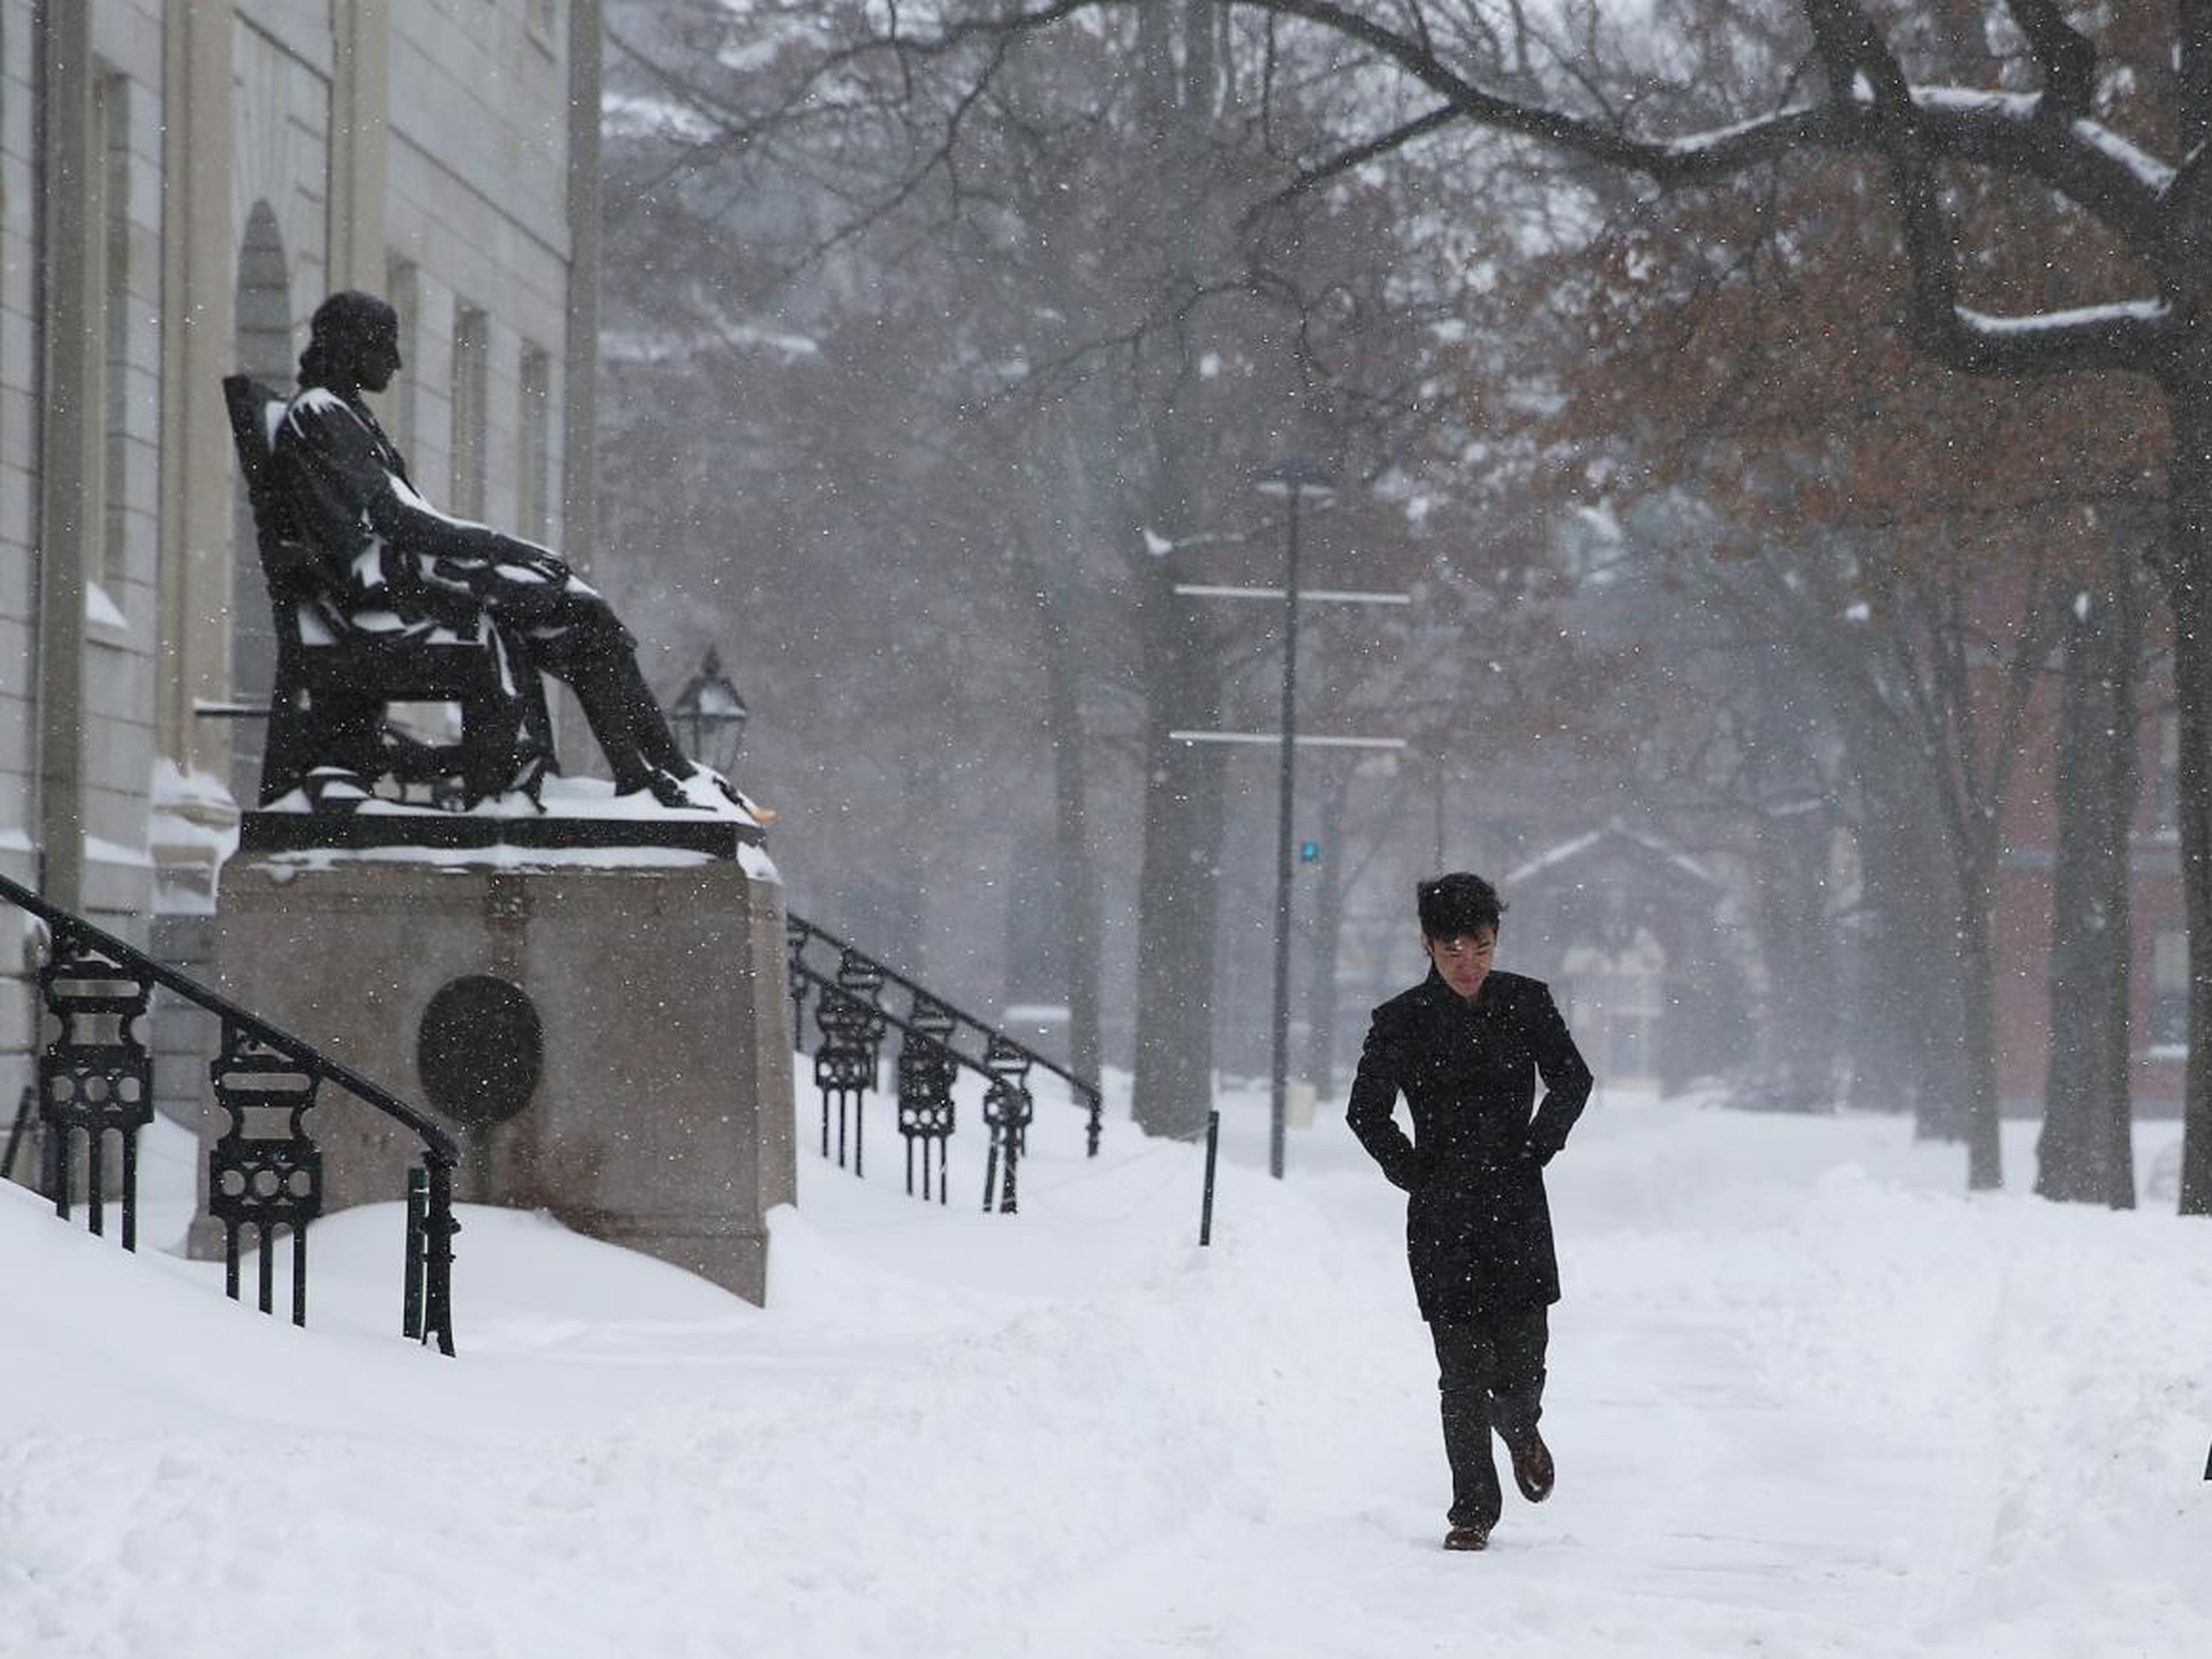 And because Harvard is situated in the northeast, temperatures can hit below 30 degrees Fahrenheit during the coldest months of the year.